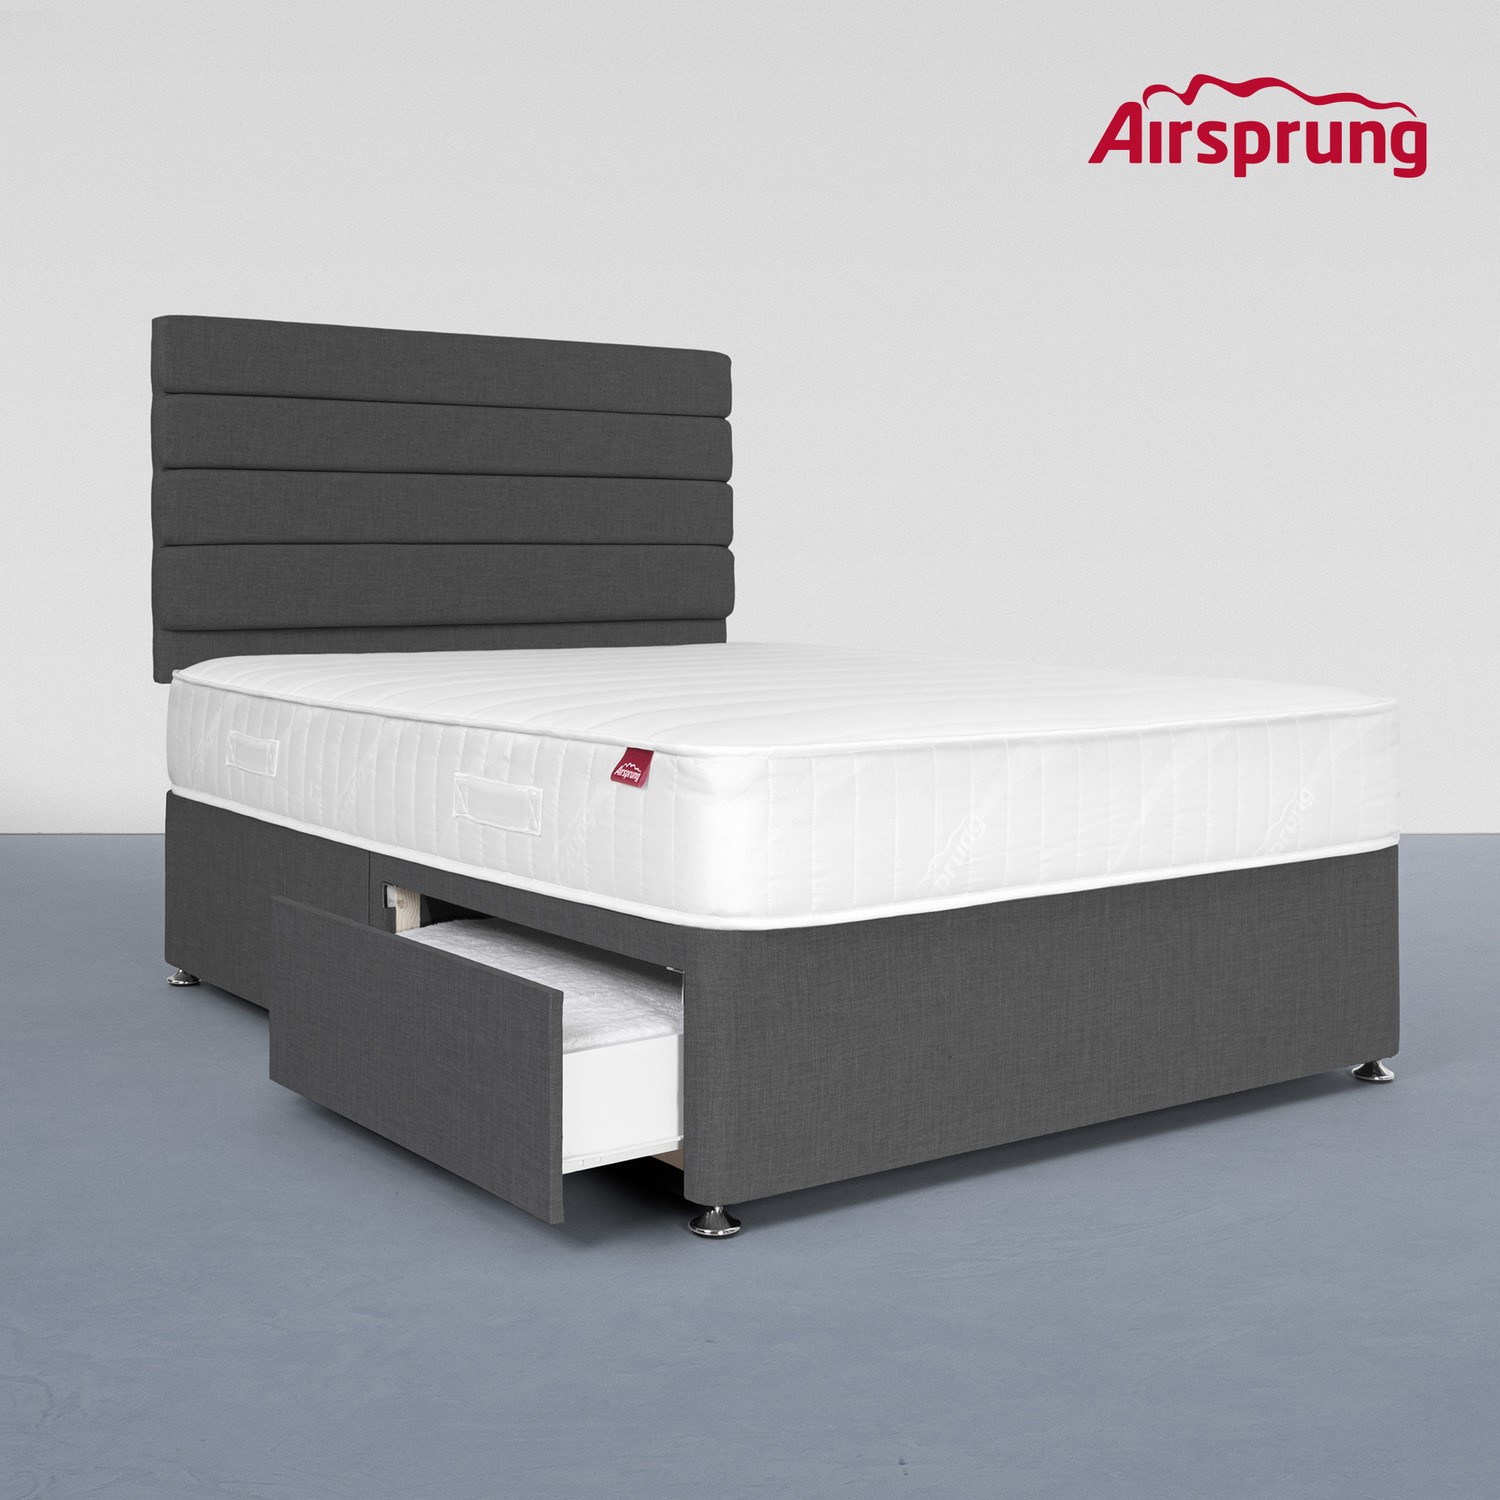 Read more about Airsprung small double 2 drawer divan bed with hybrid mattress charcoal